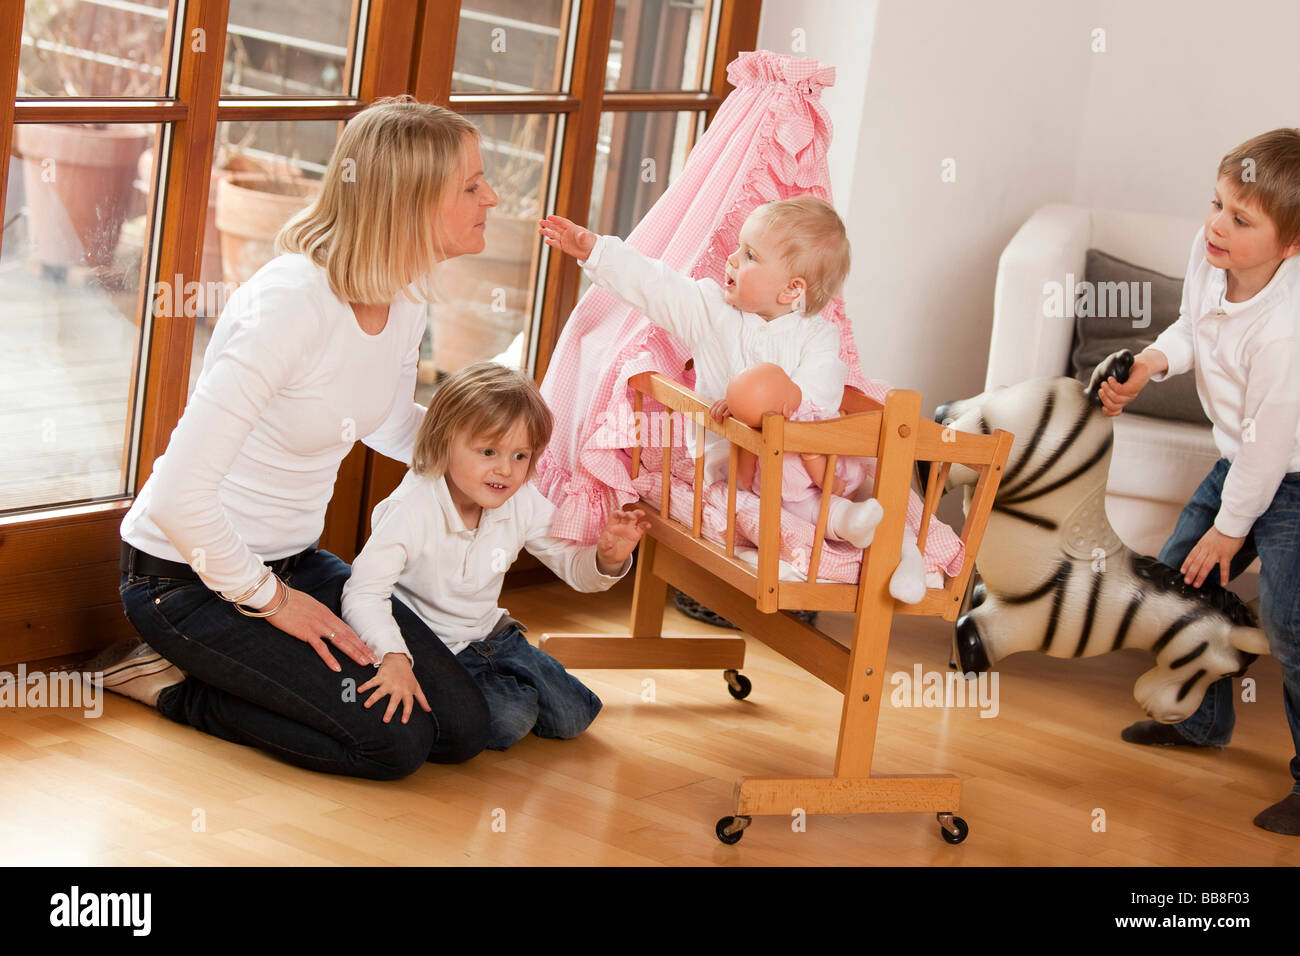 Mother with three children, 1, 3 and 6 years old, playing with a doll's pram Stock Photo